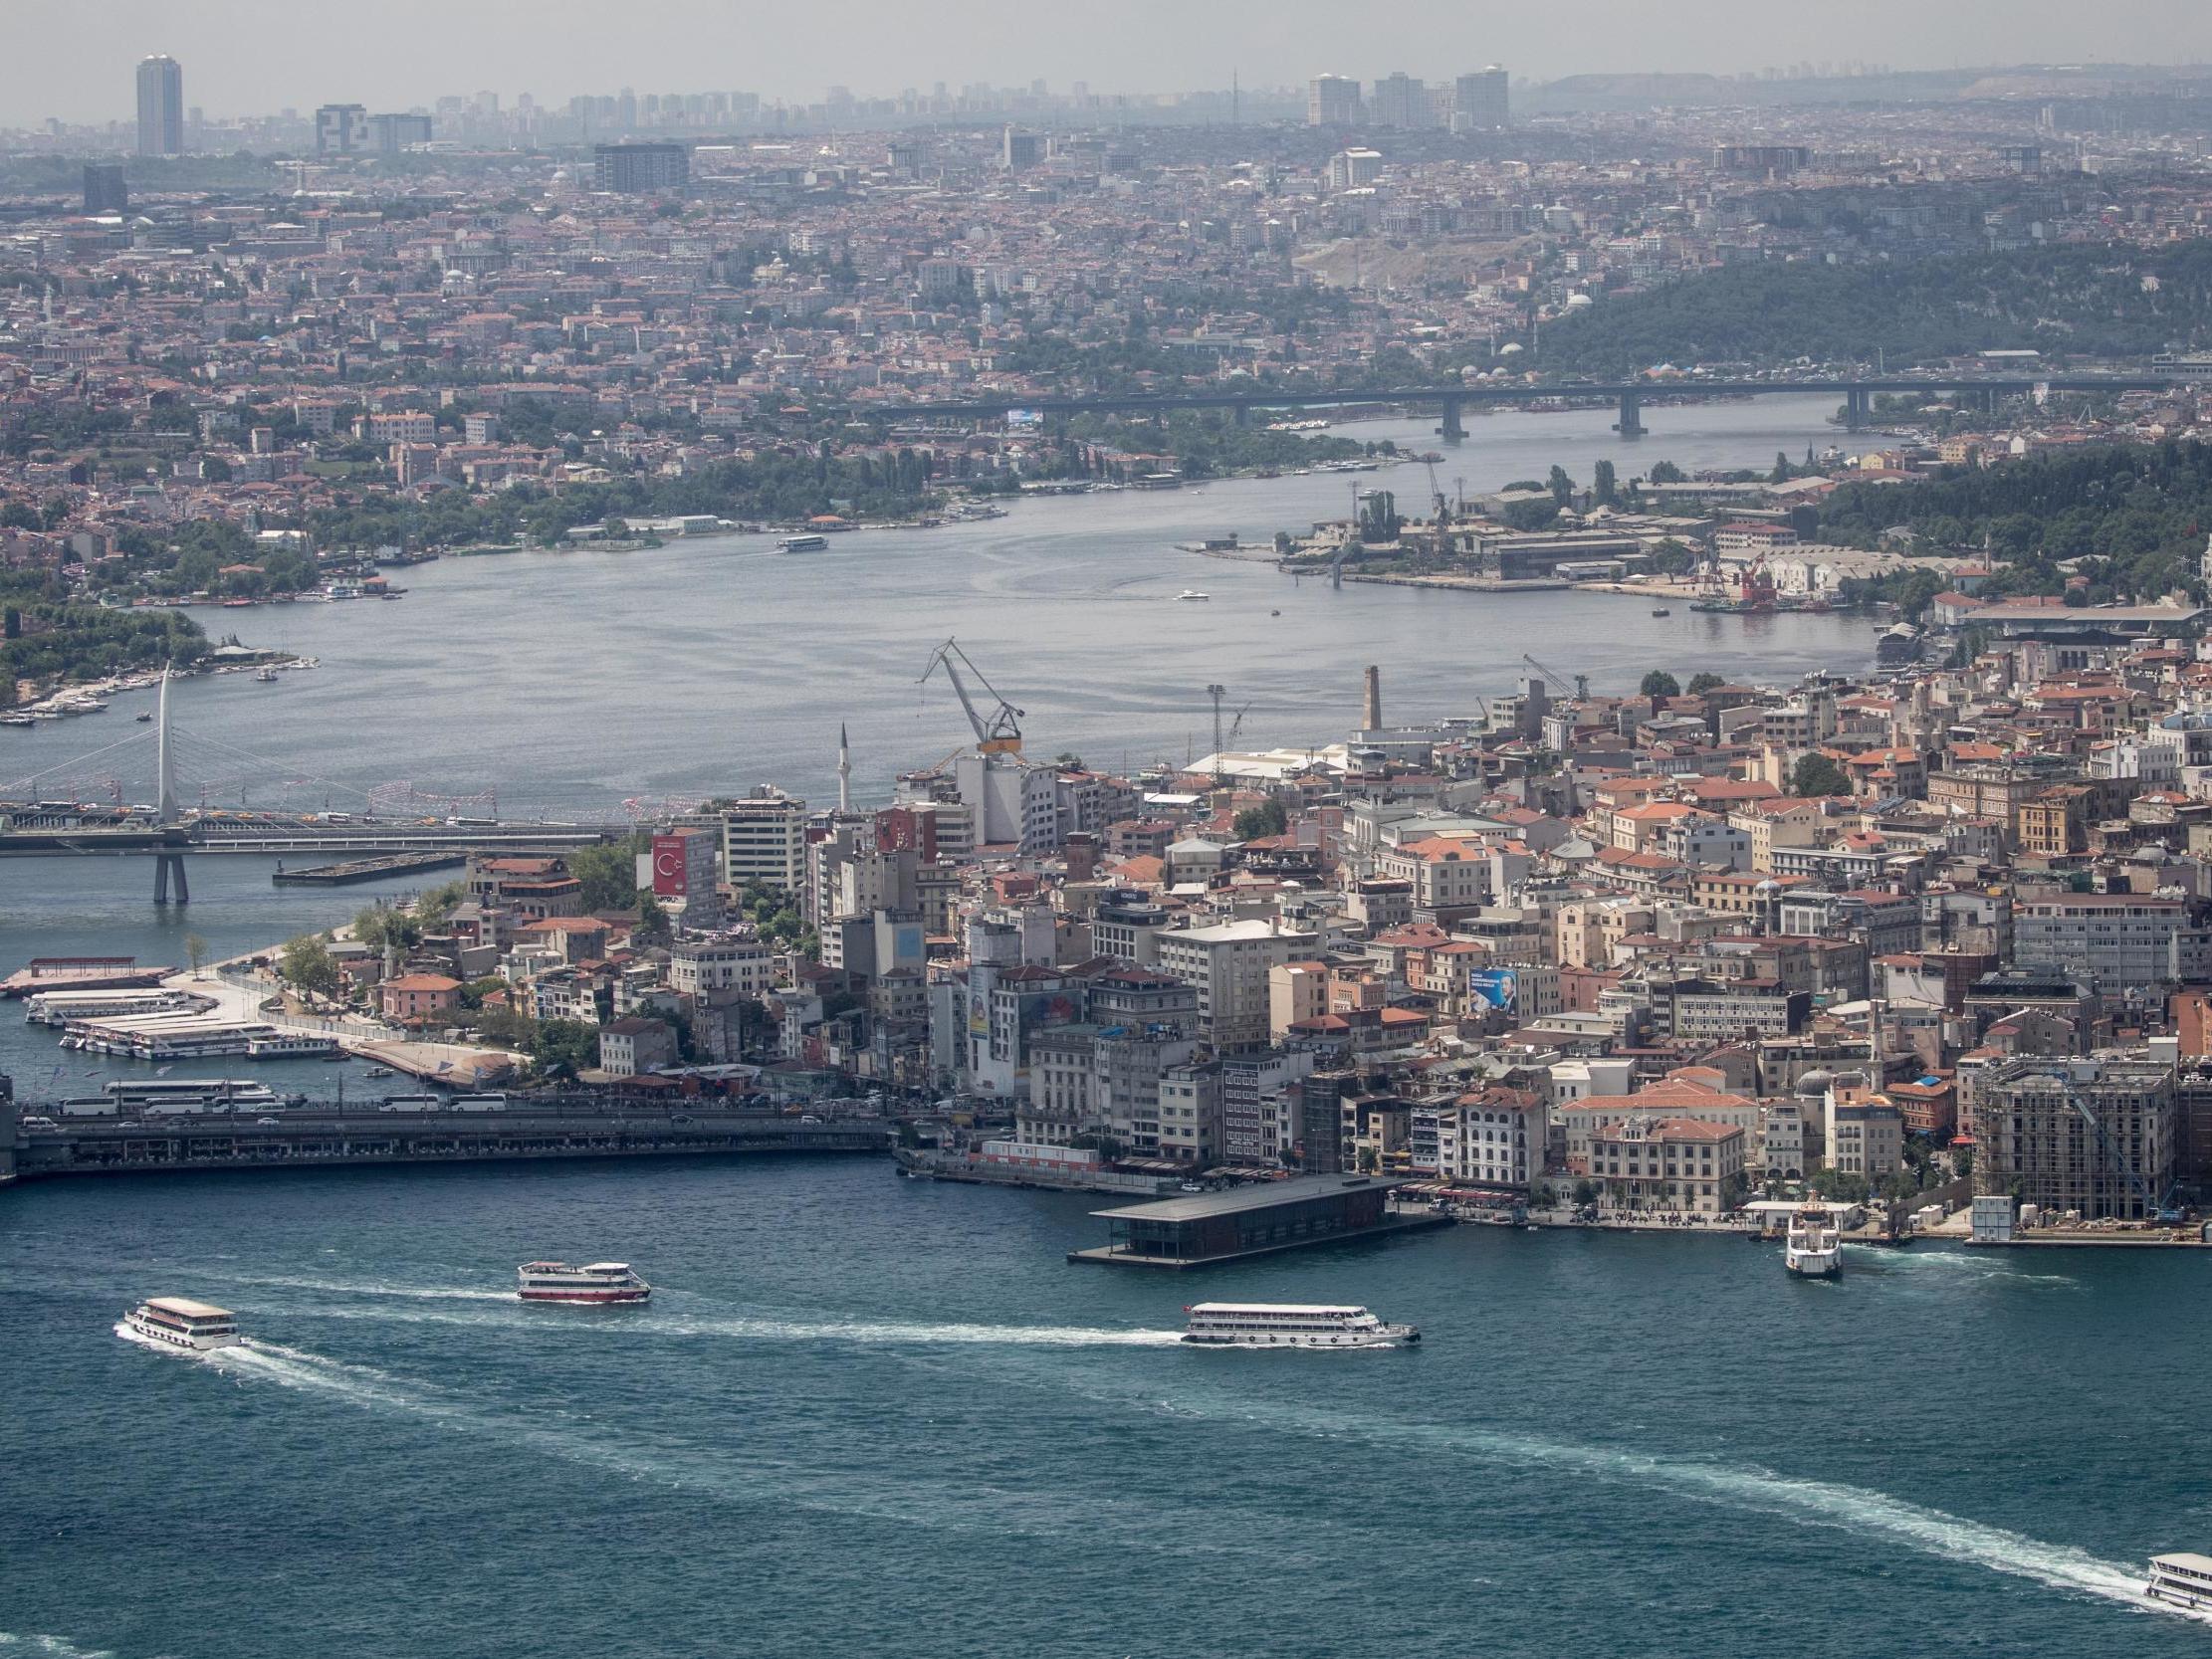 Istanbul (pictured) has been struck by an earthquake